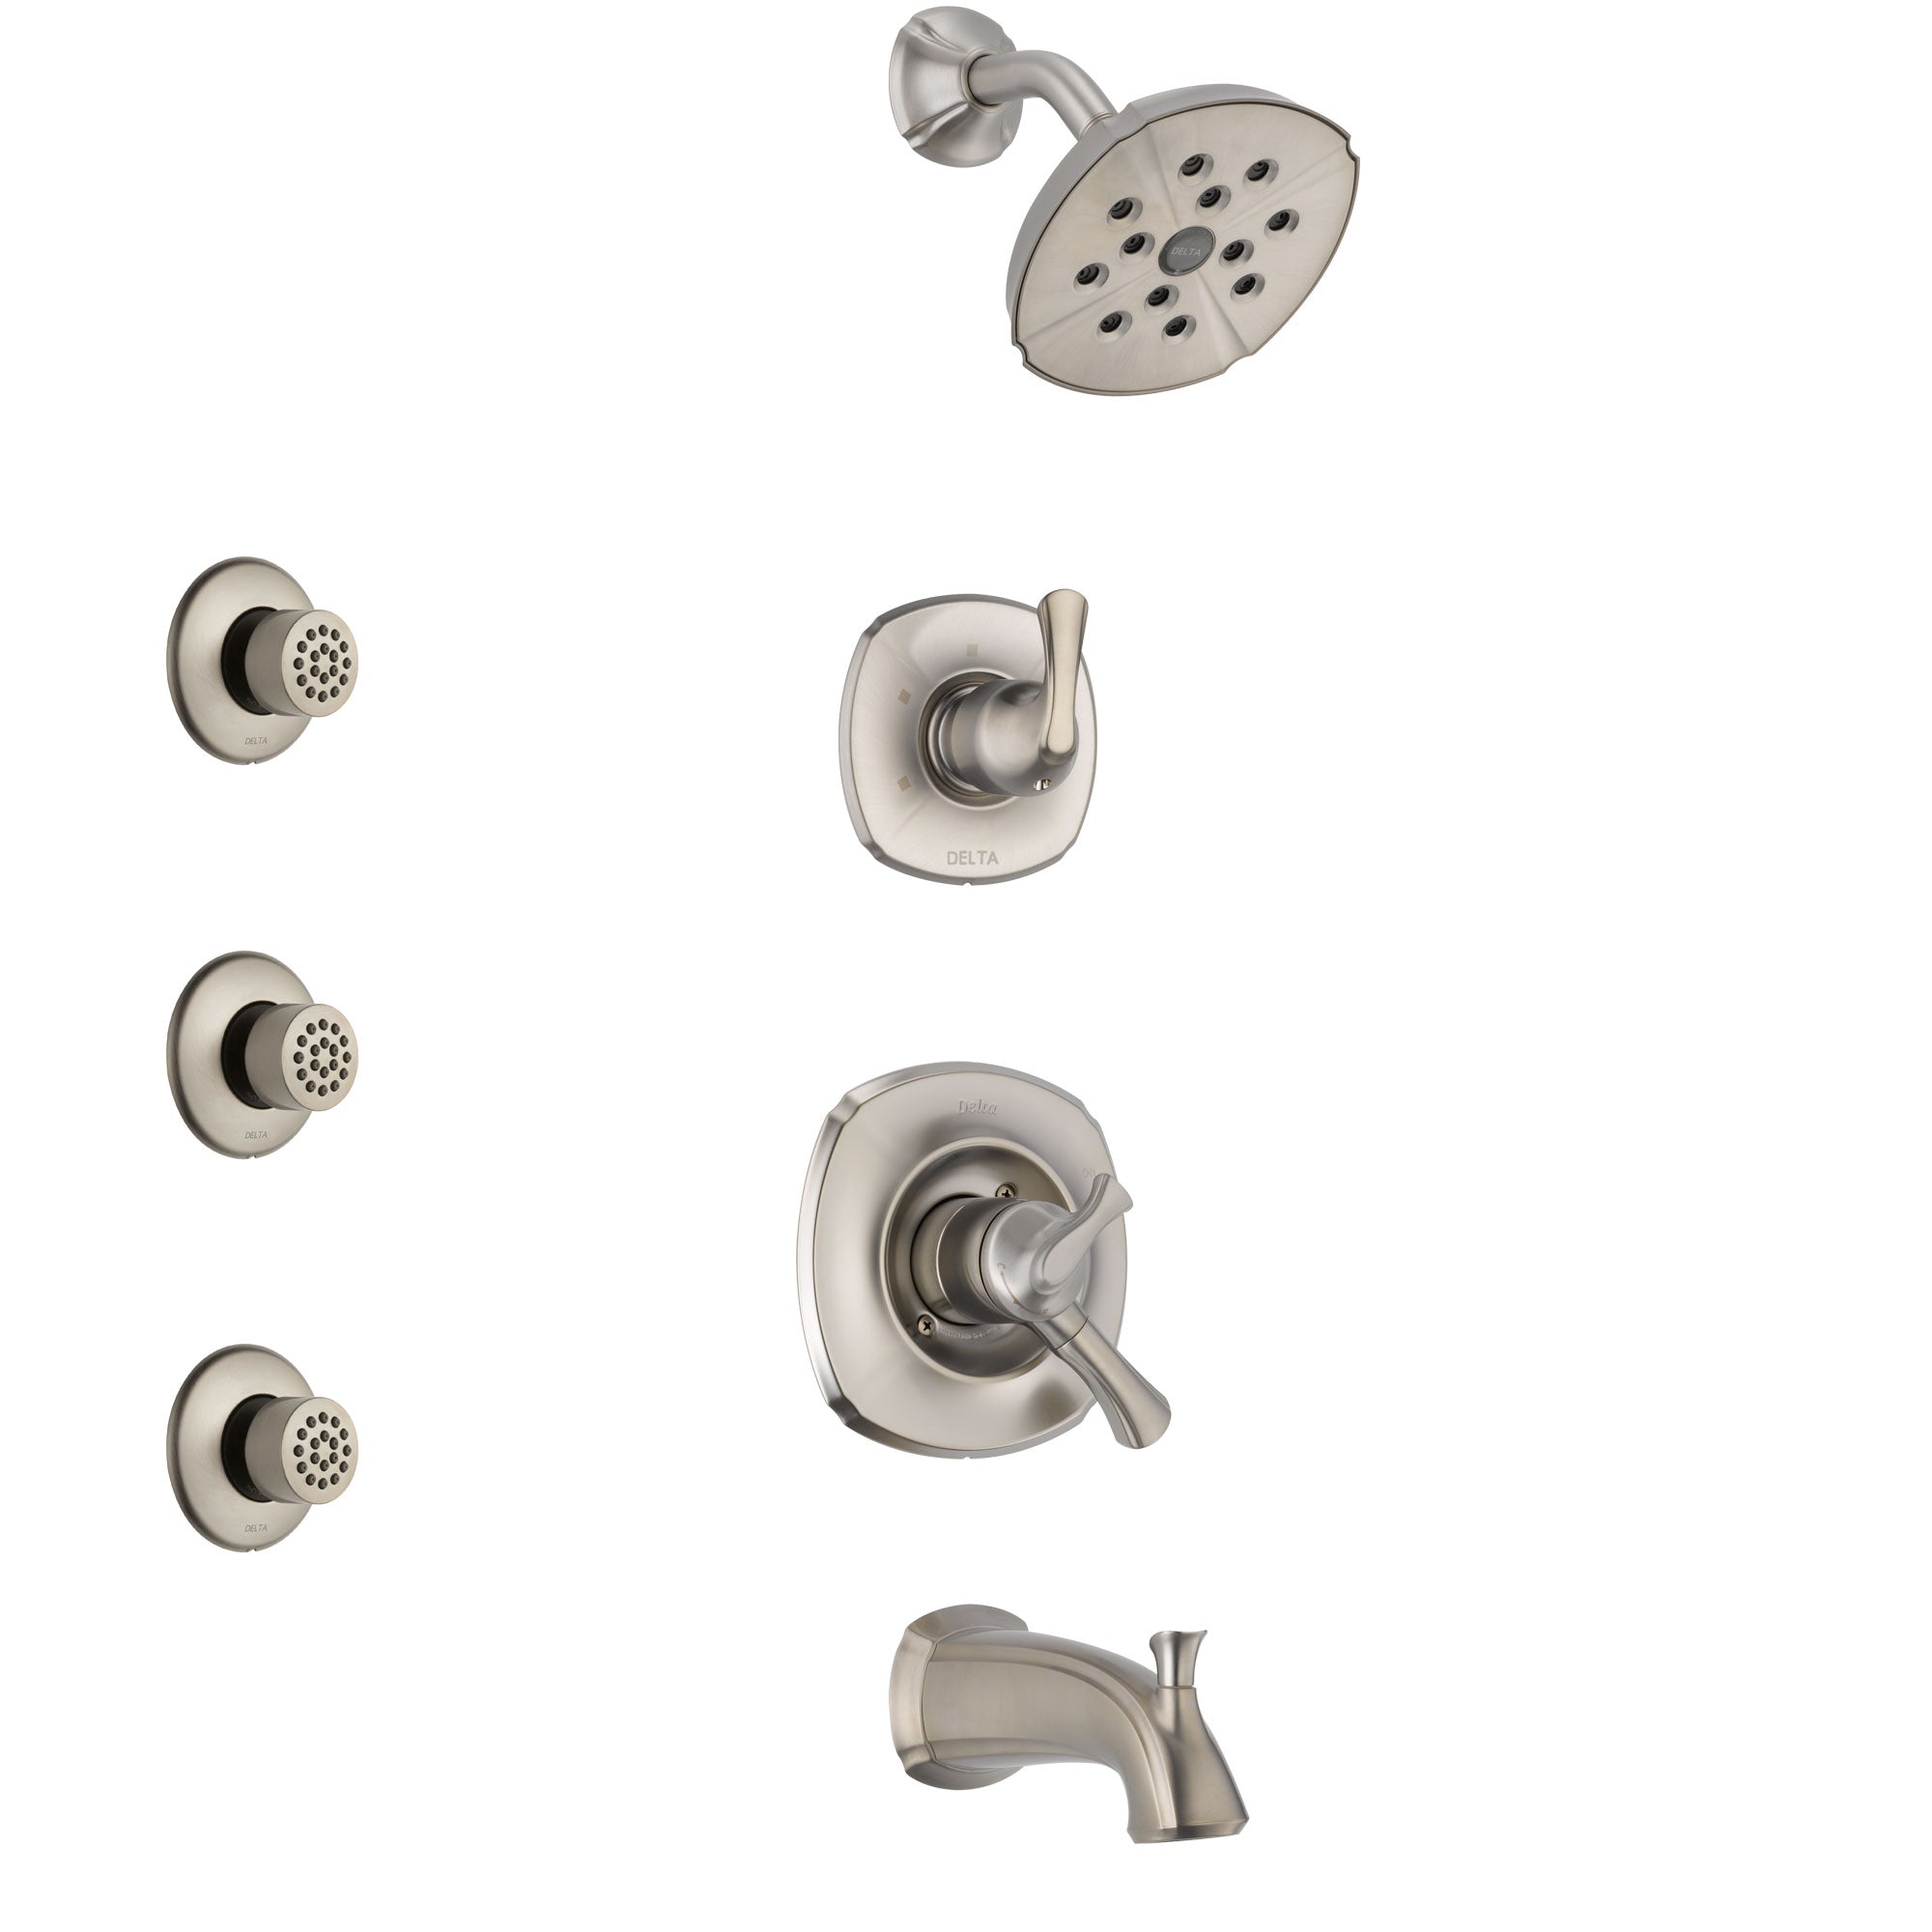 Delta Addison Stainless Steel Finish Tub and Shower System with Dual Control Handle, 3-Setting Diverter, Showerhead, and 3 Body Sprays SS17492SS2